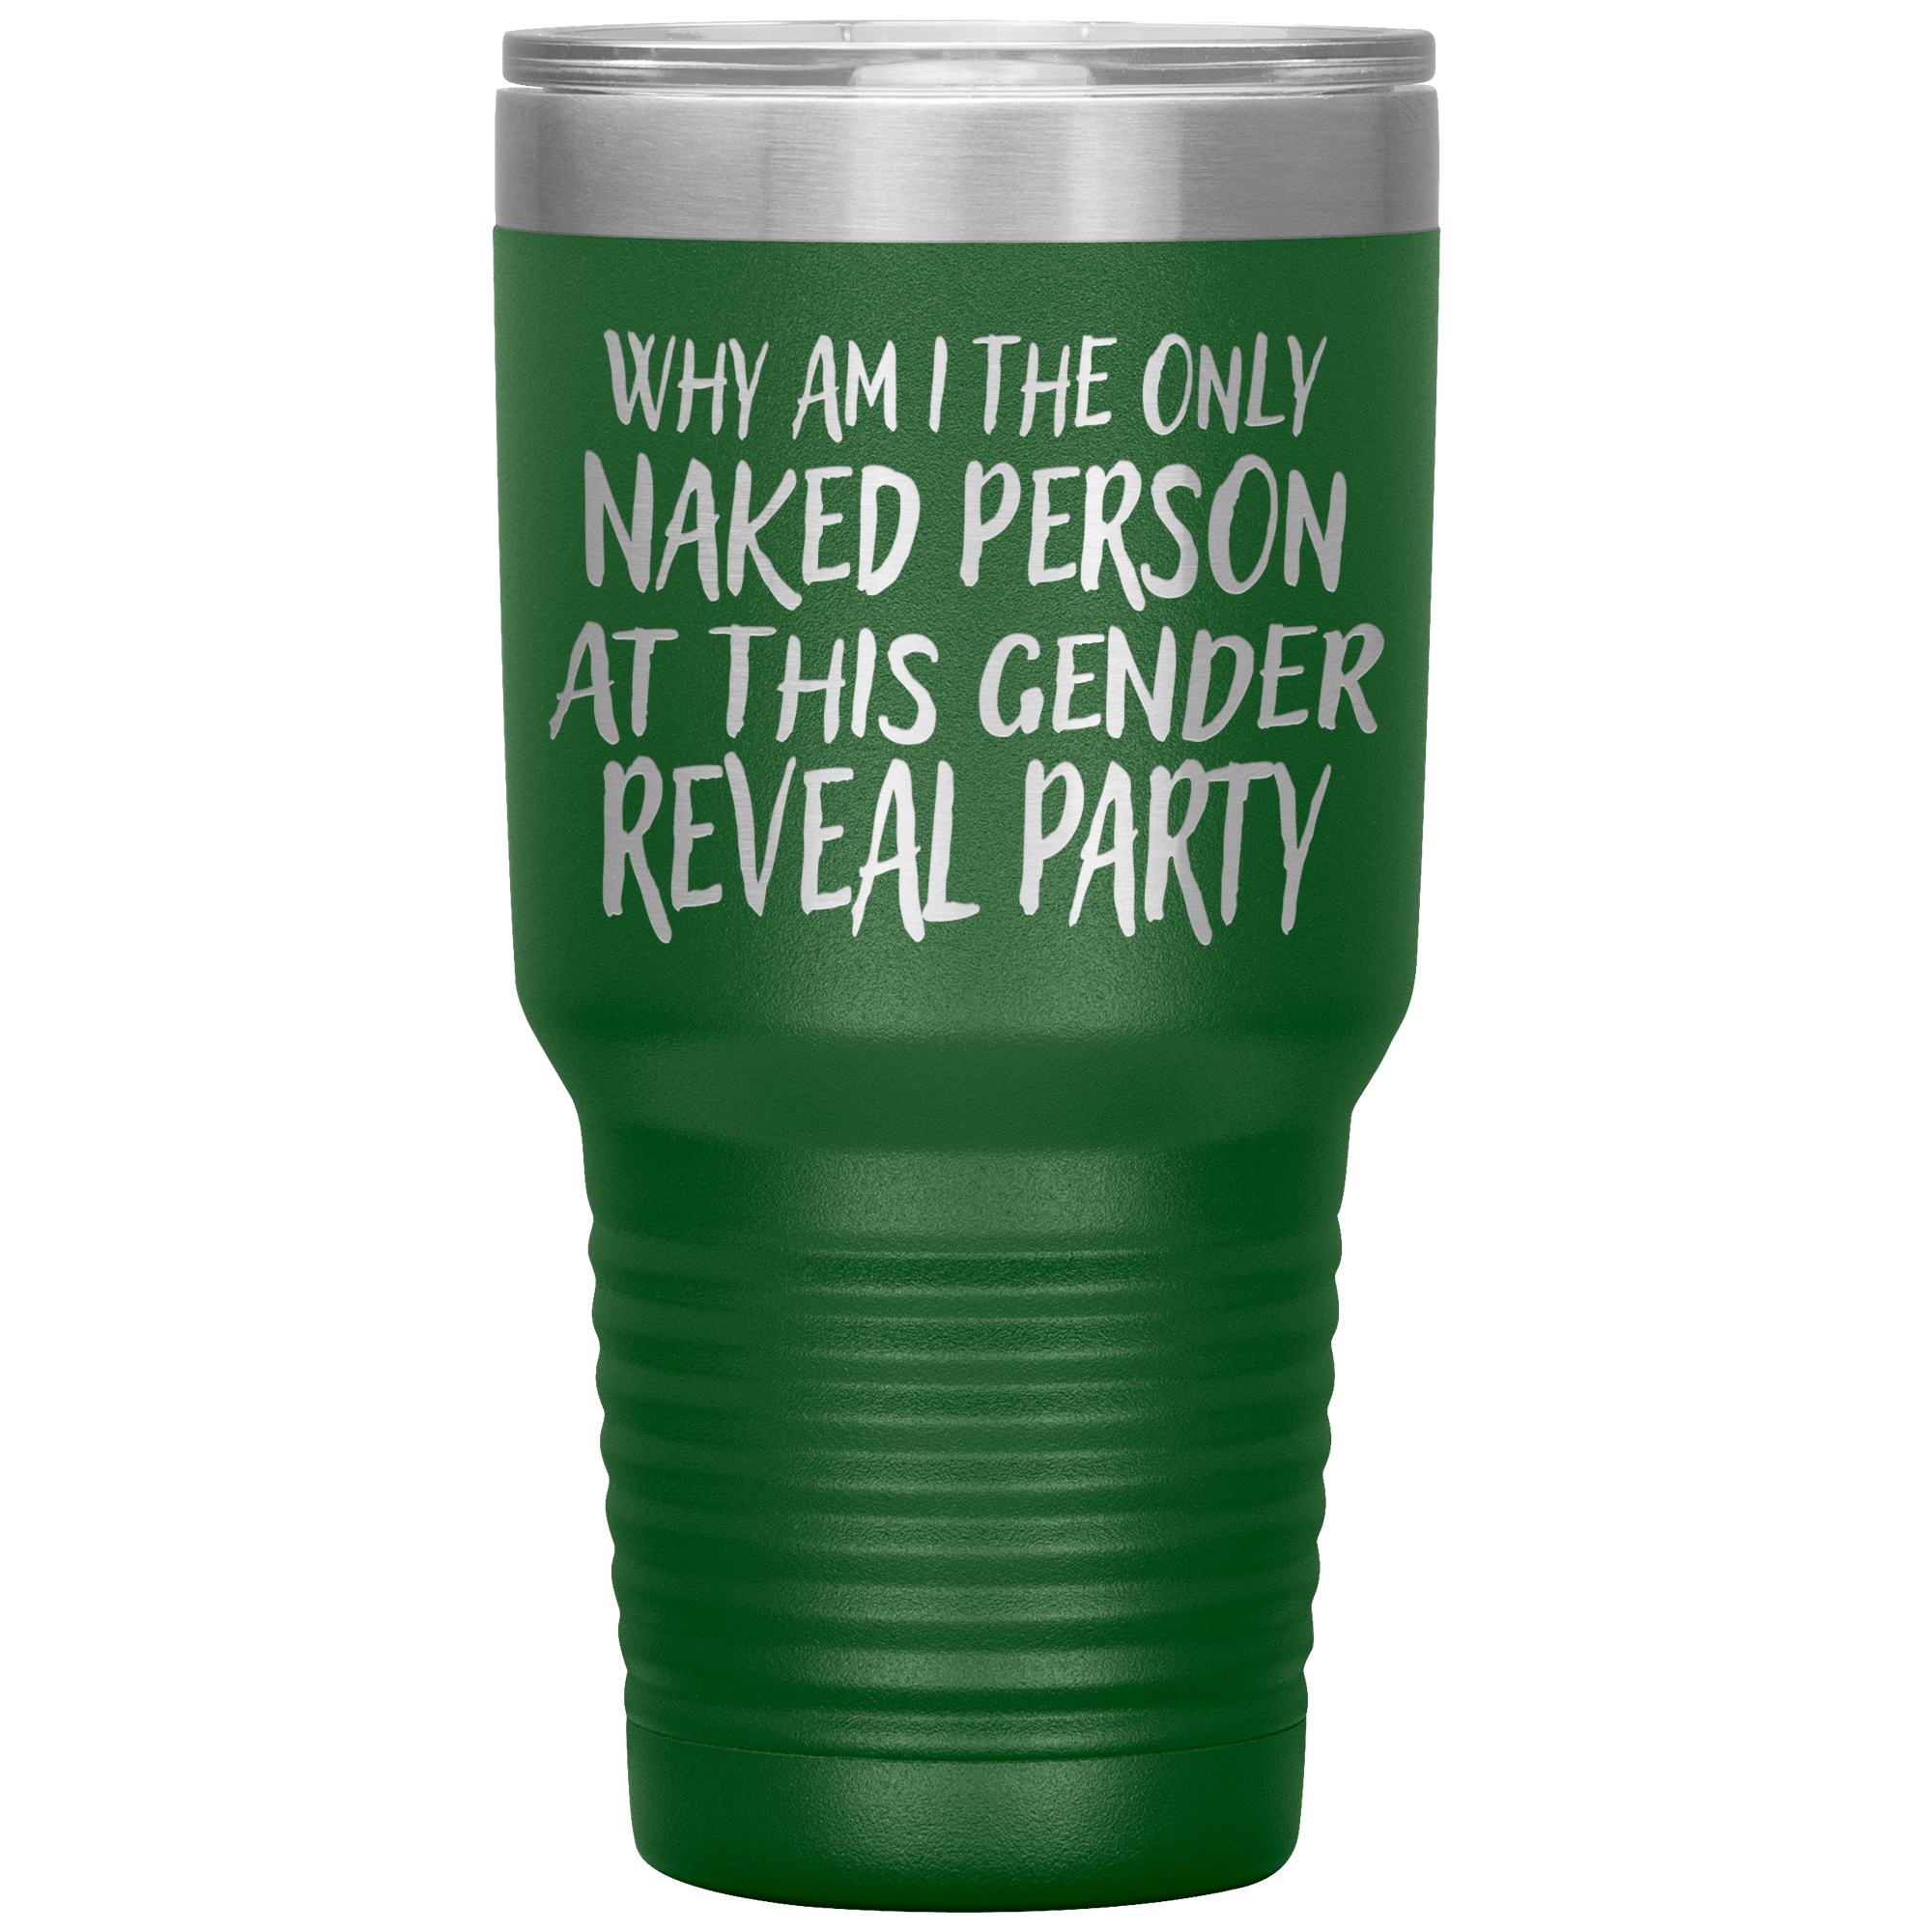 " NAKED IN GENDER REVEAL PARTY "